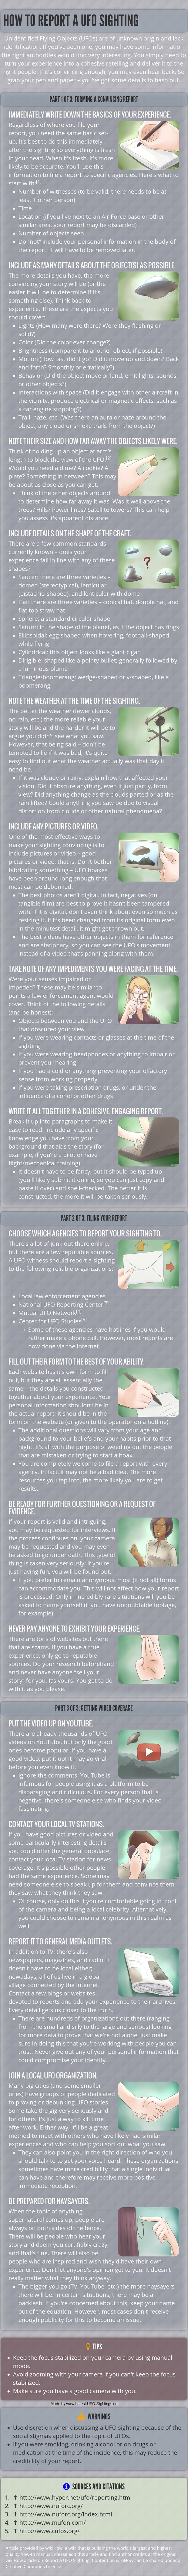 How to report a UFO Sighting